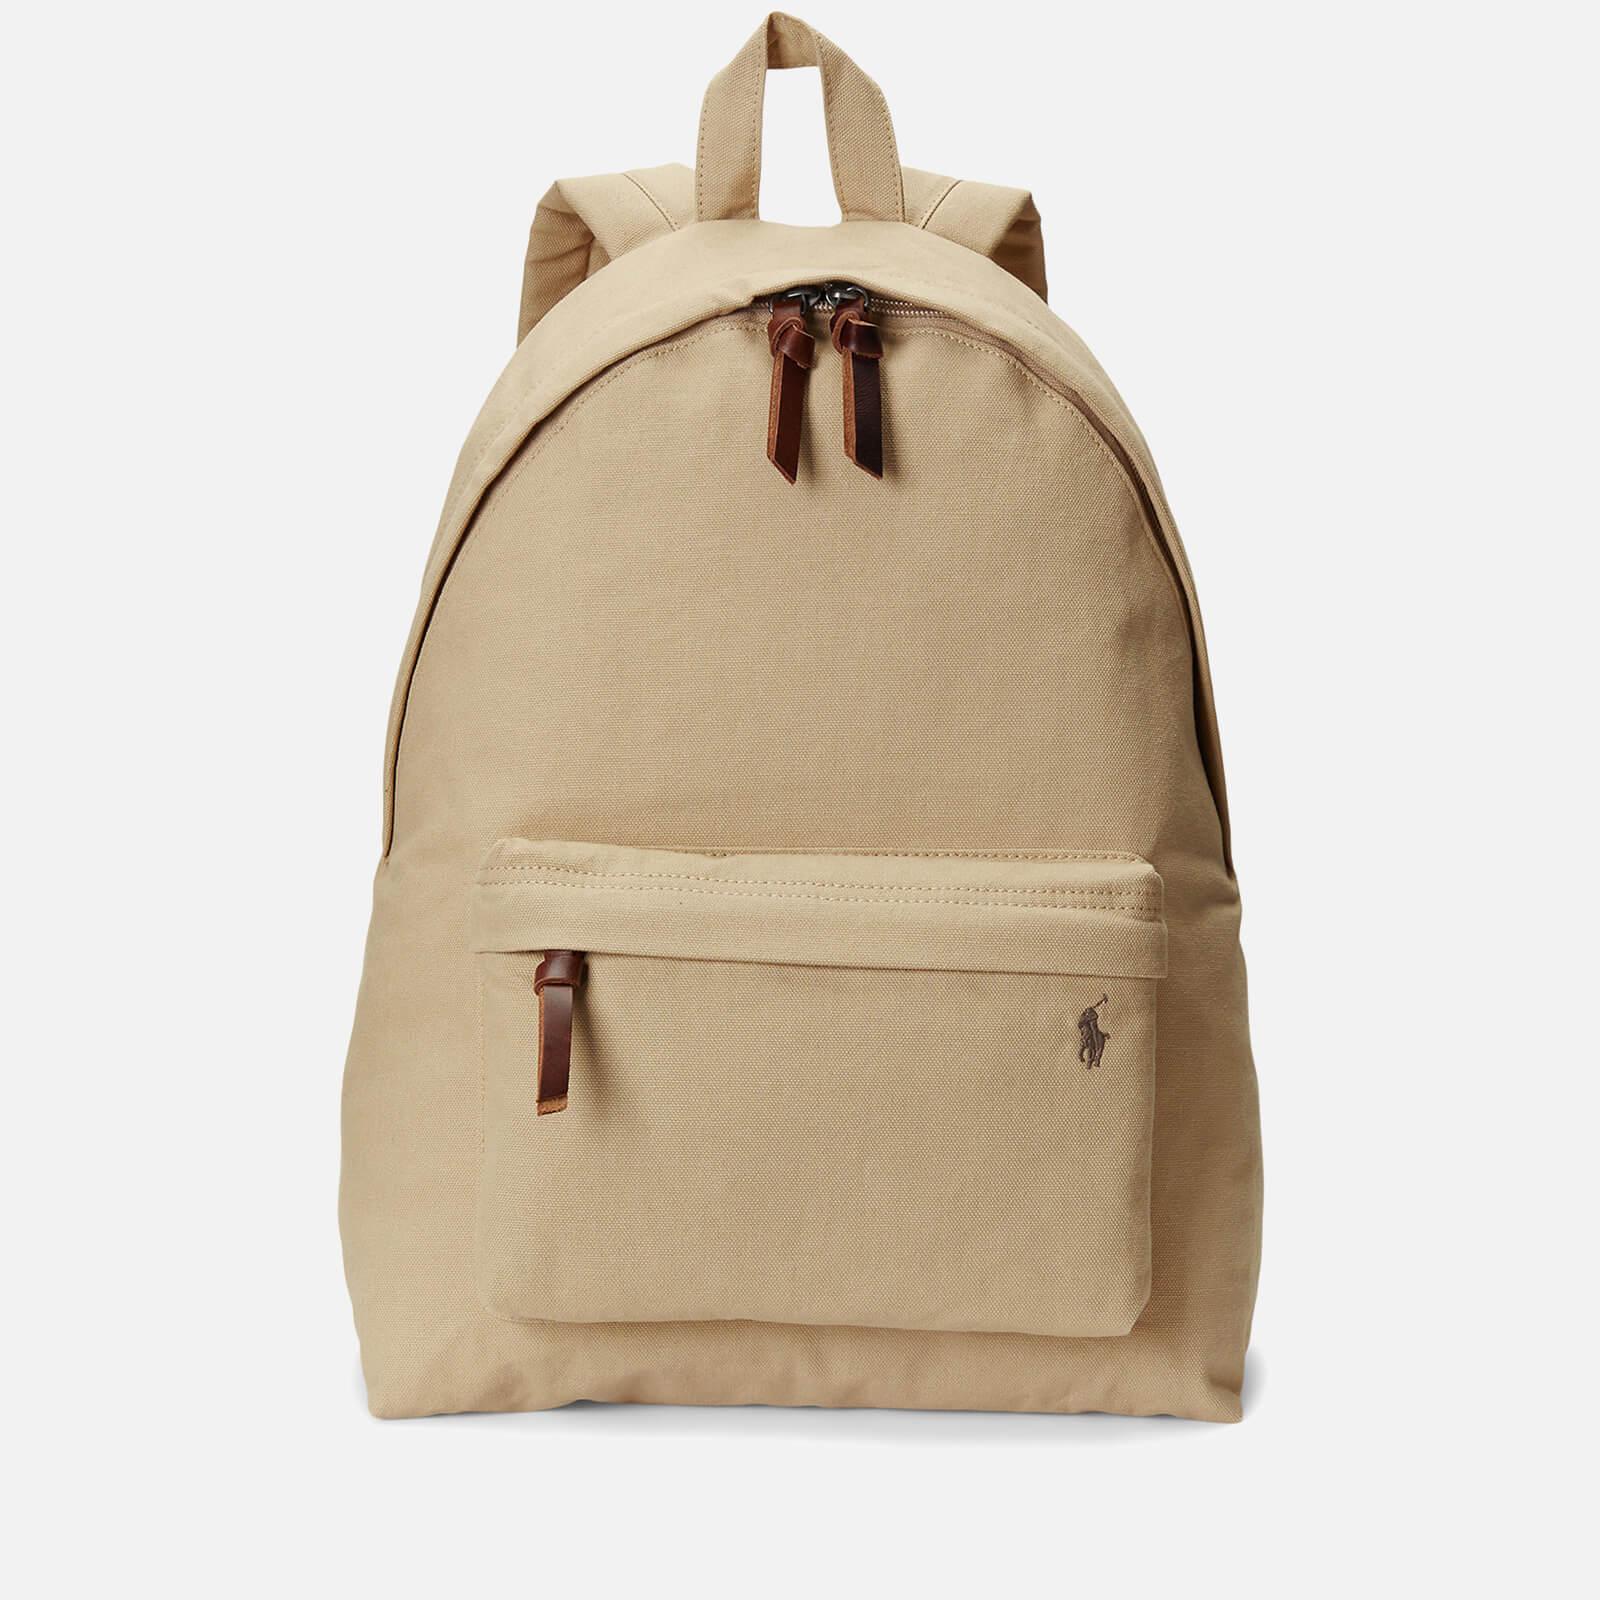 Polo Ralph Lauren logo-stamp Leather Backpack - Farfetch